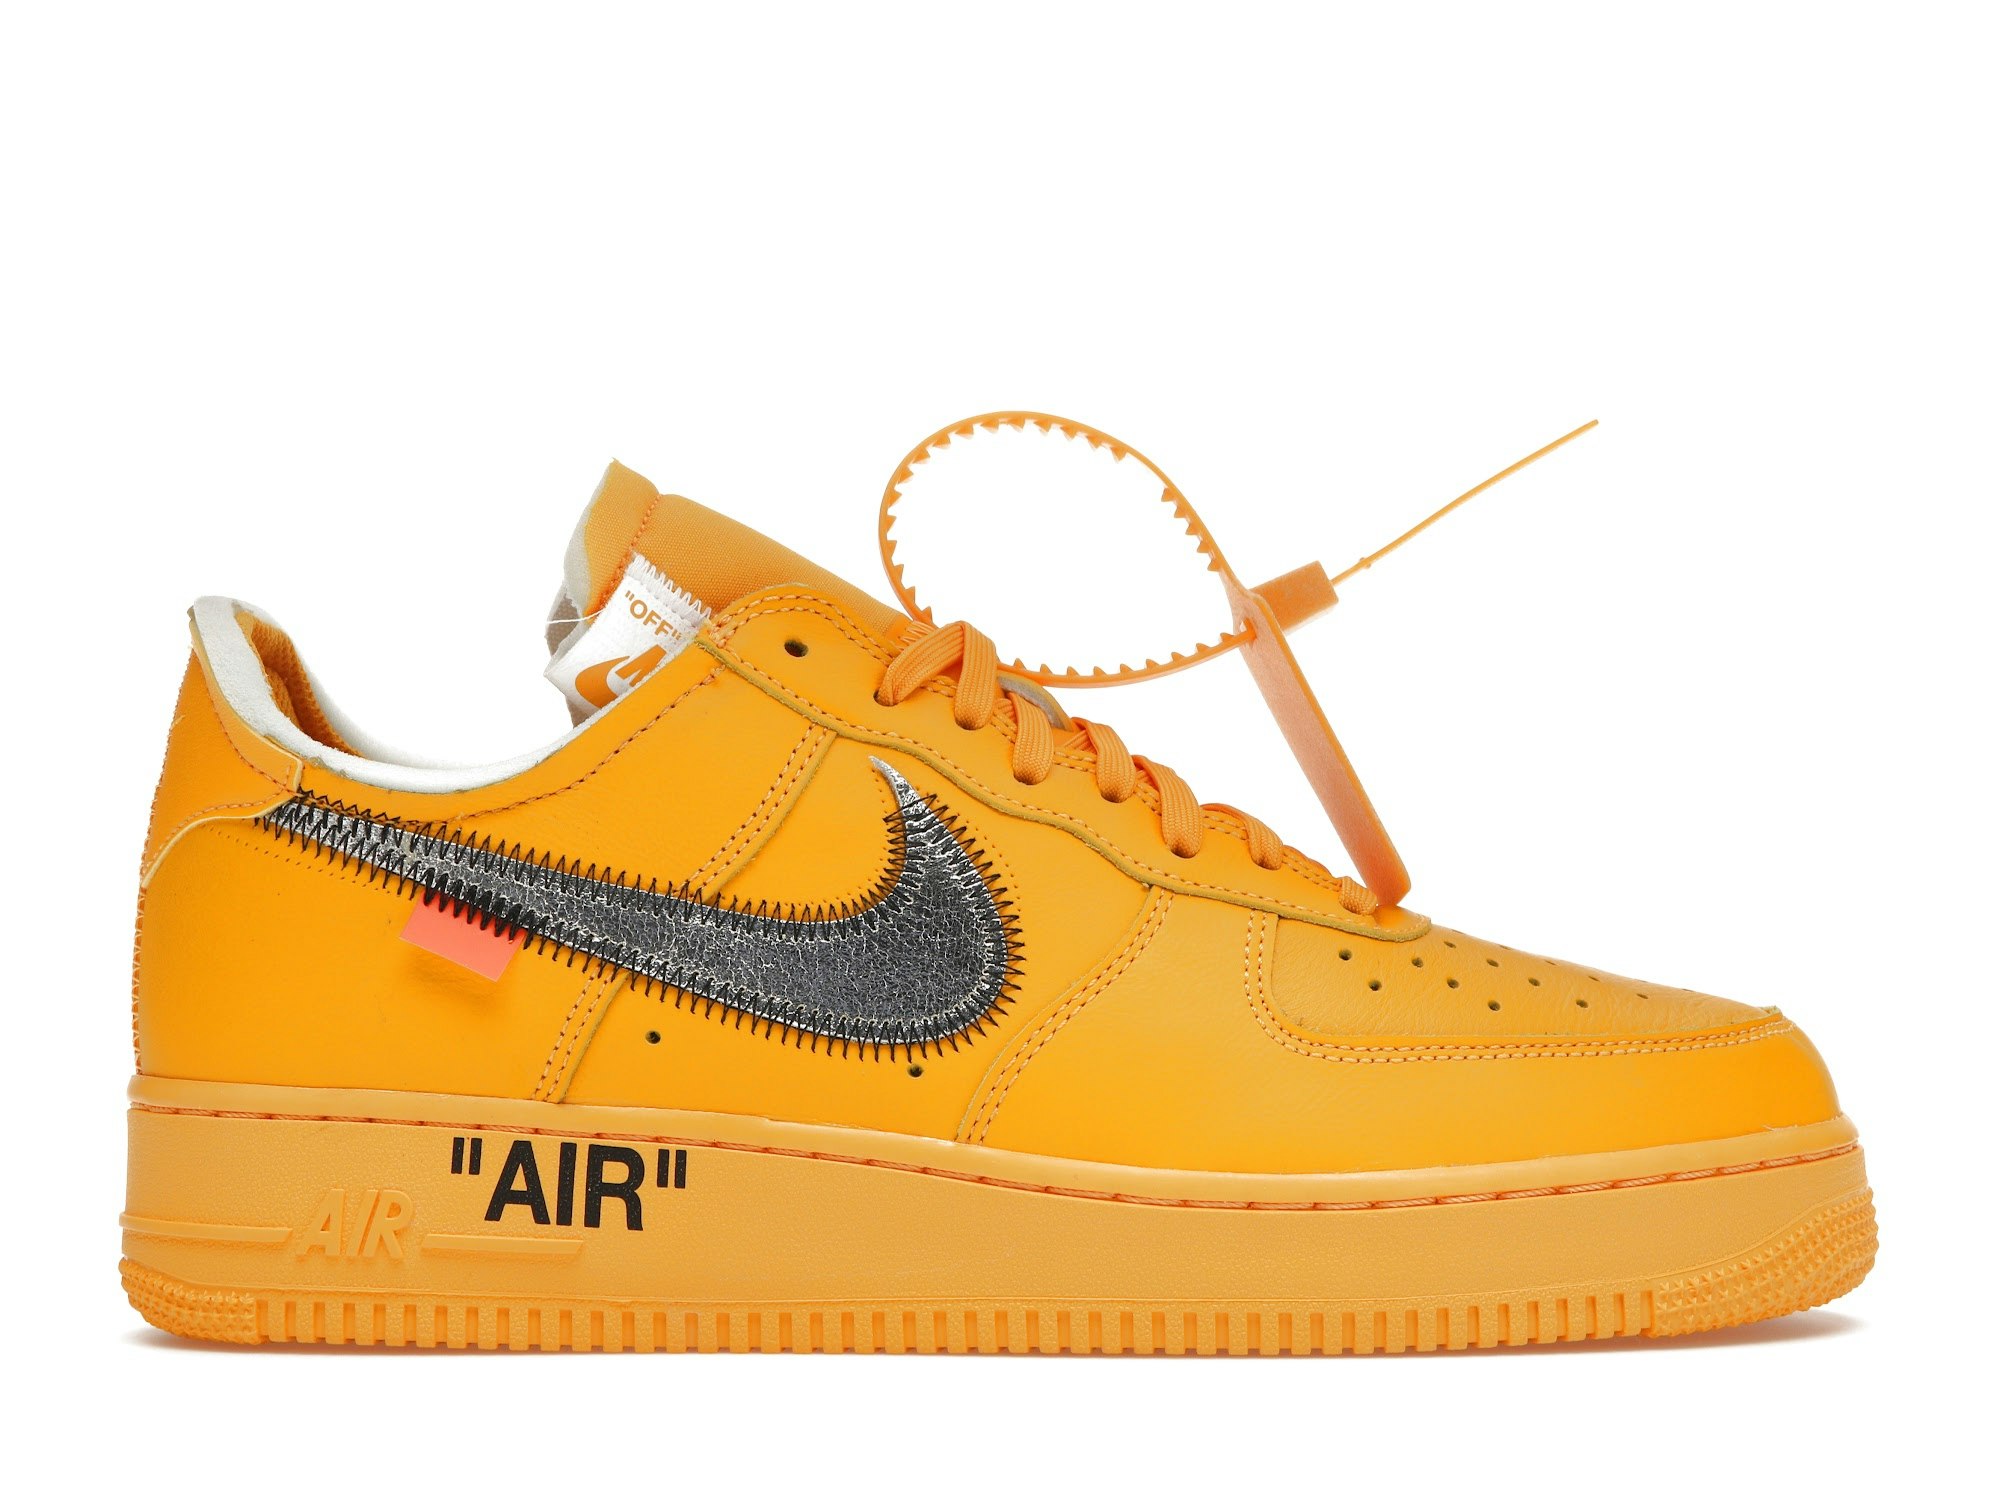 Buy Yellow Shoes: Nike, adidas & more | GOAT